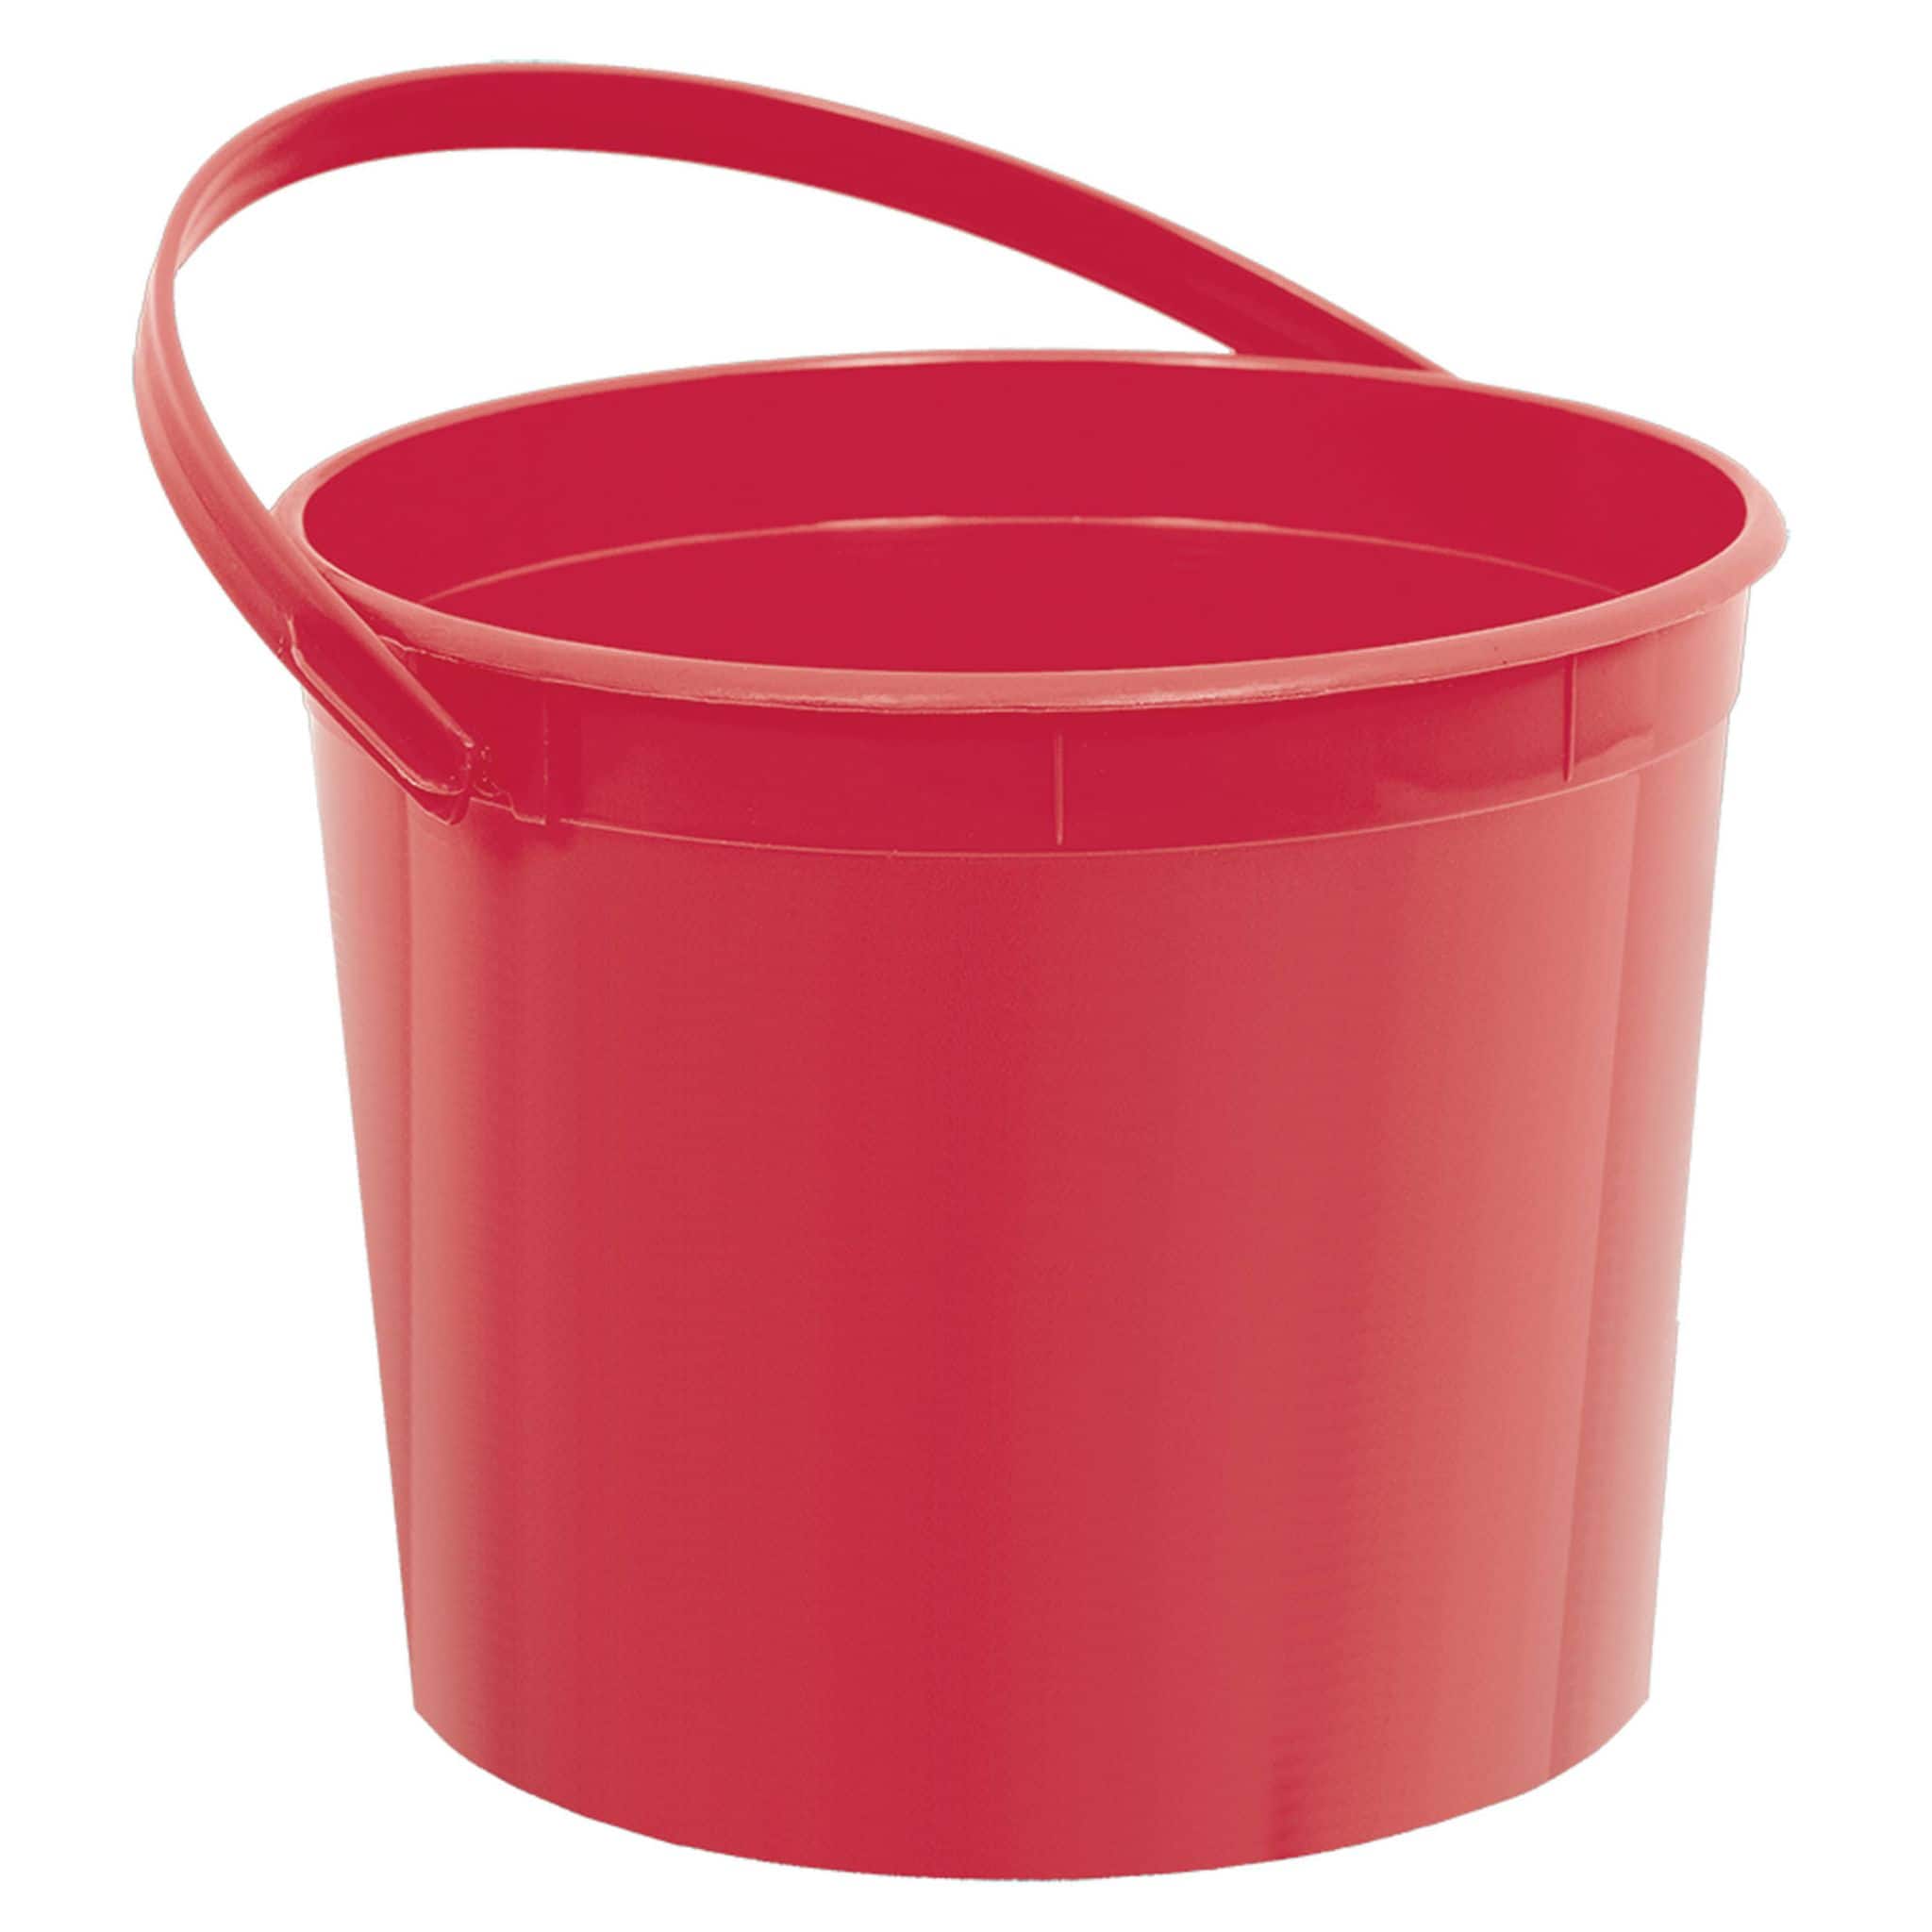 Mini Bright Plastic Buckets by ArtMinds™, Michaels